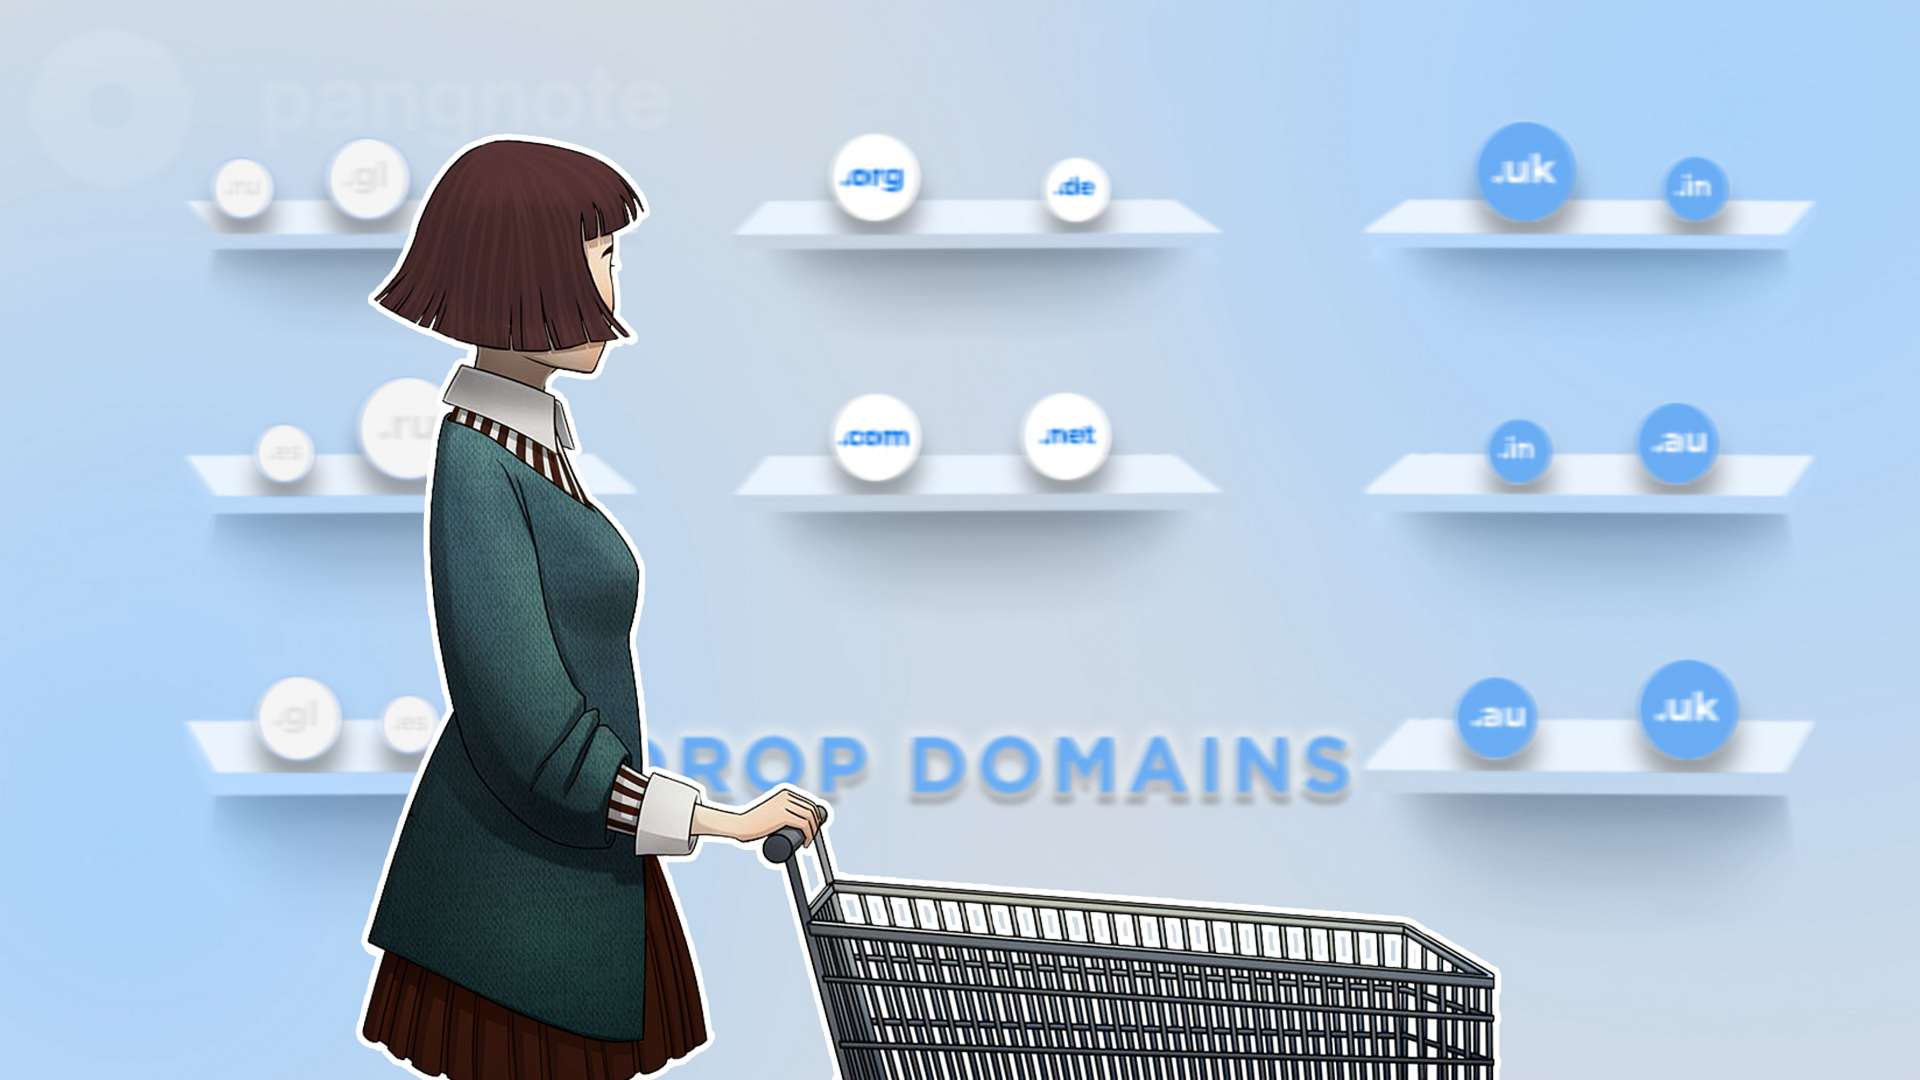 Why and how to buy drop domains?